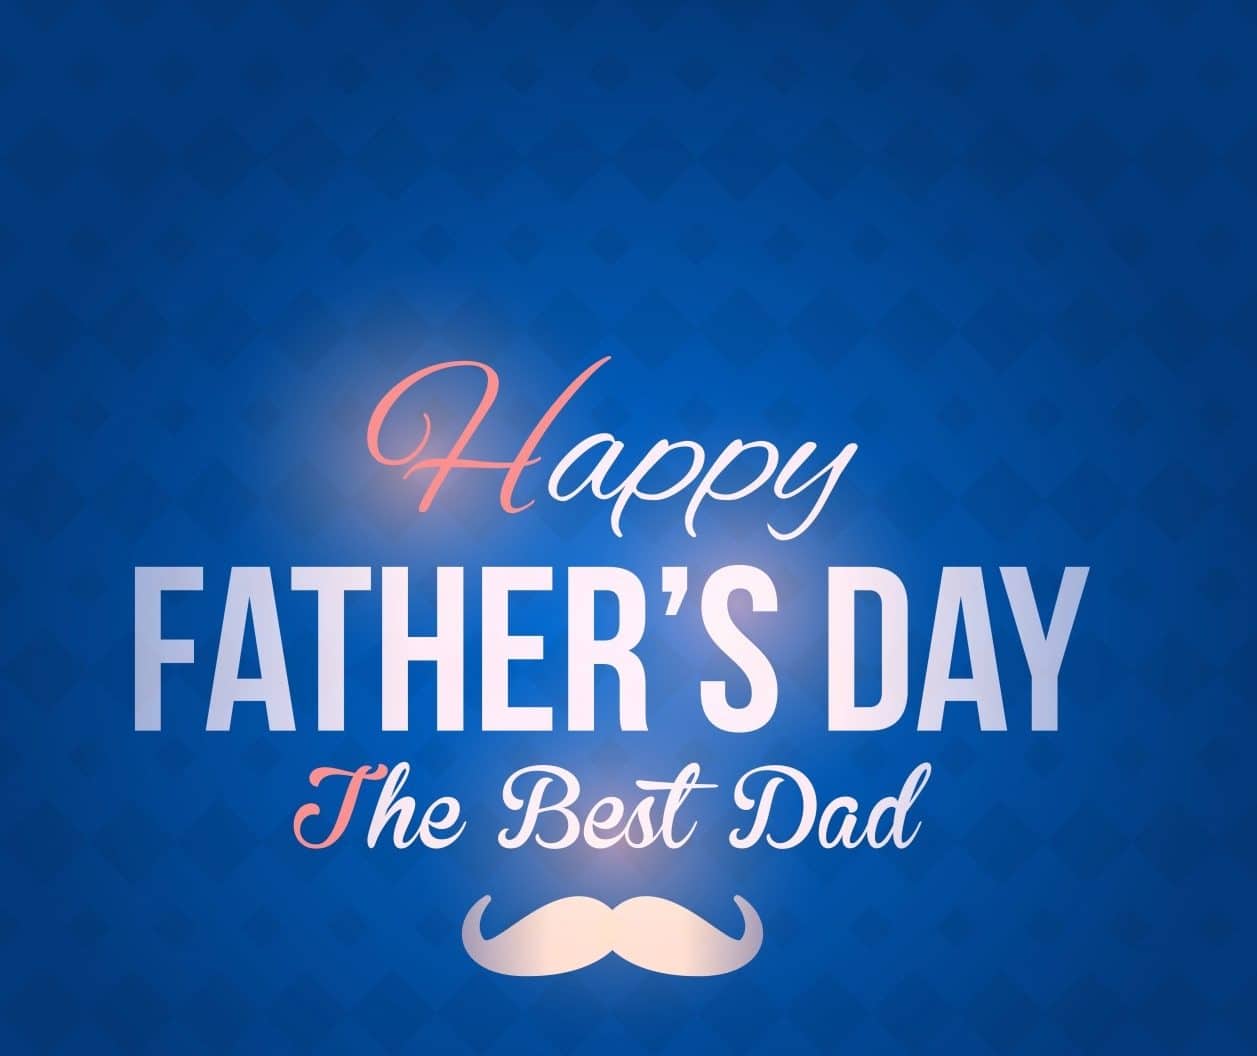 Happy Father’s day poster